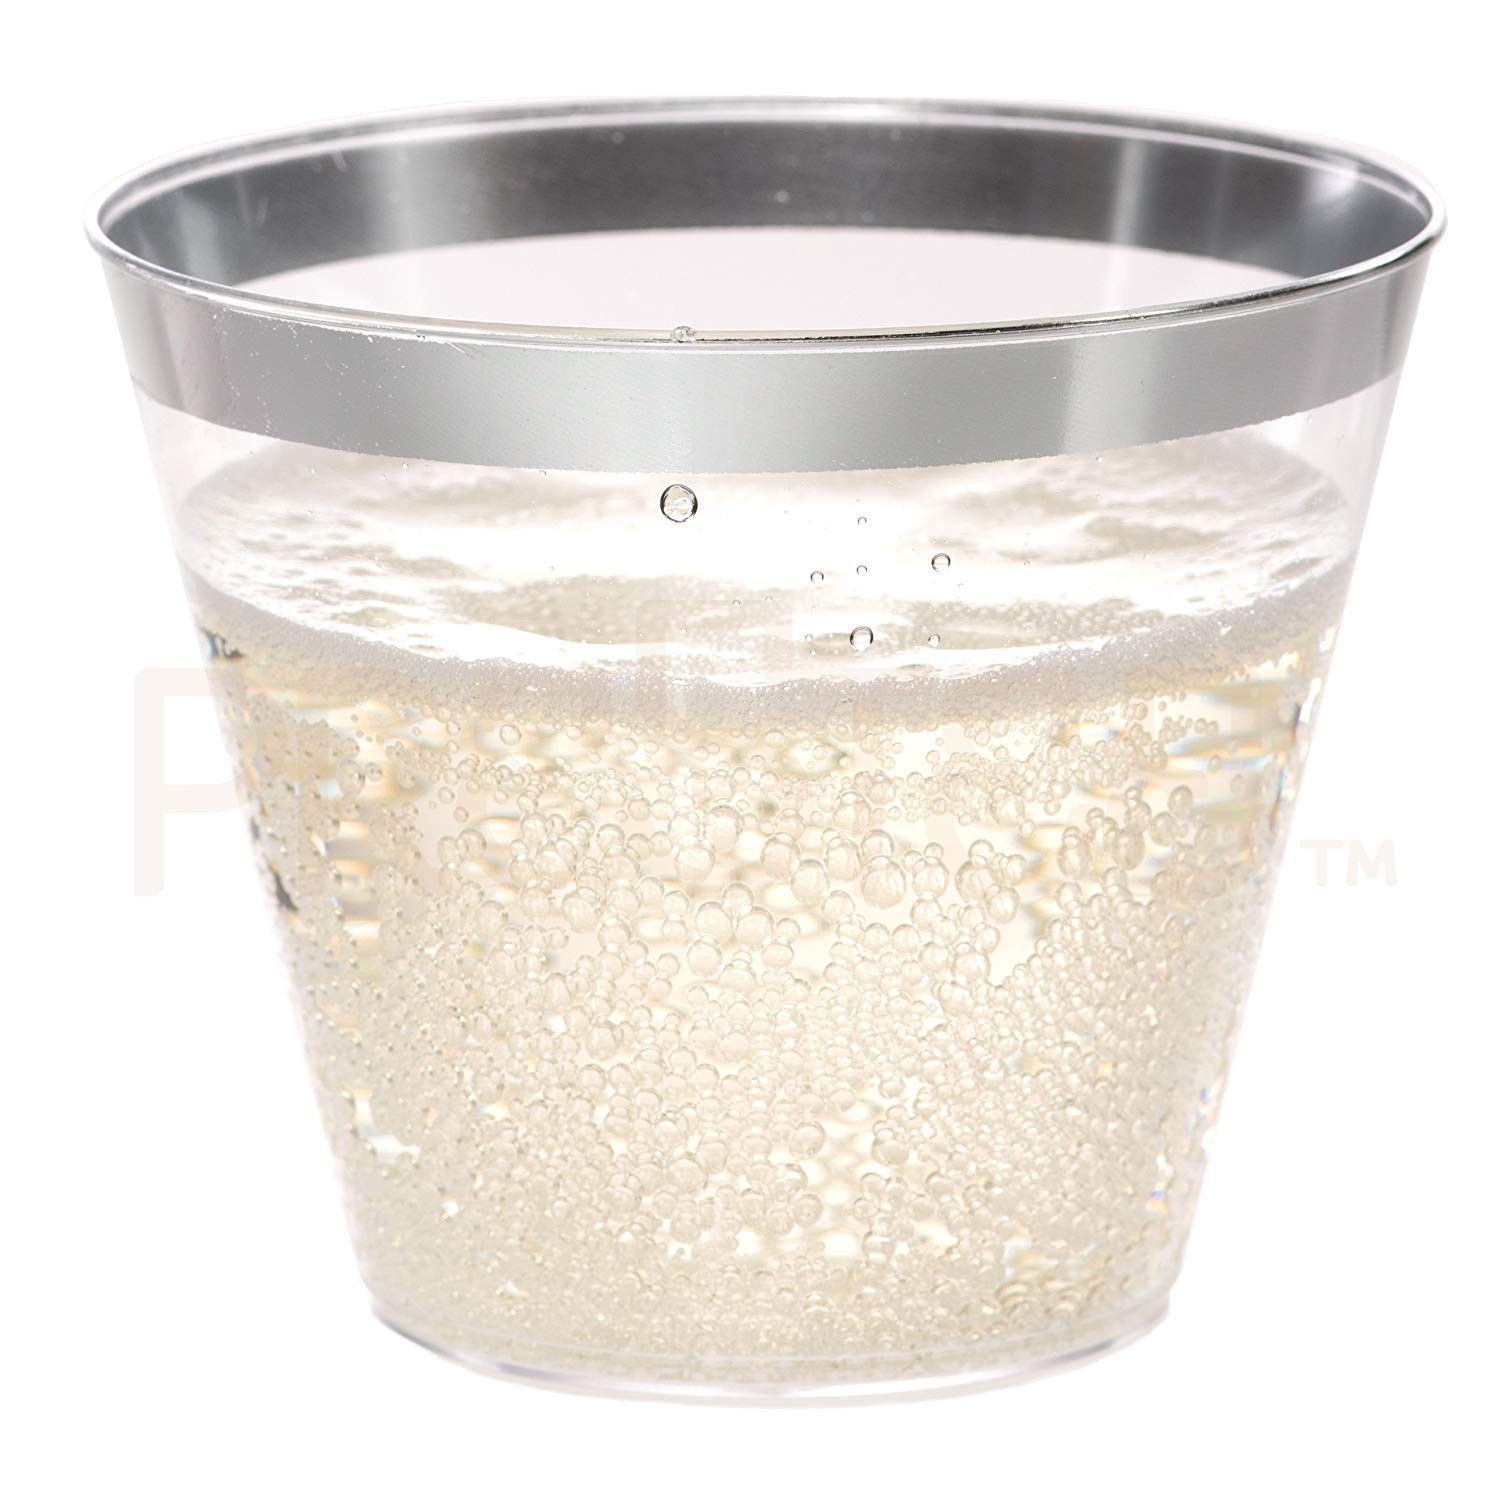 21 Spectacular Clear Glass Vase with Gold Trim 2024 free download clear glass vase with gold trim of amazon com silver plastic cups 5 oz 100 pack hard clear for 100 pack hard clear plastic cups disposable party cups fancy wedding tumblers nice silver rim p